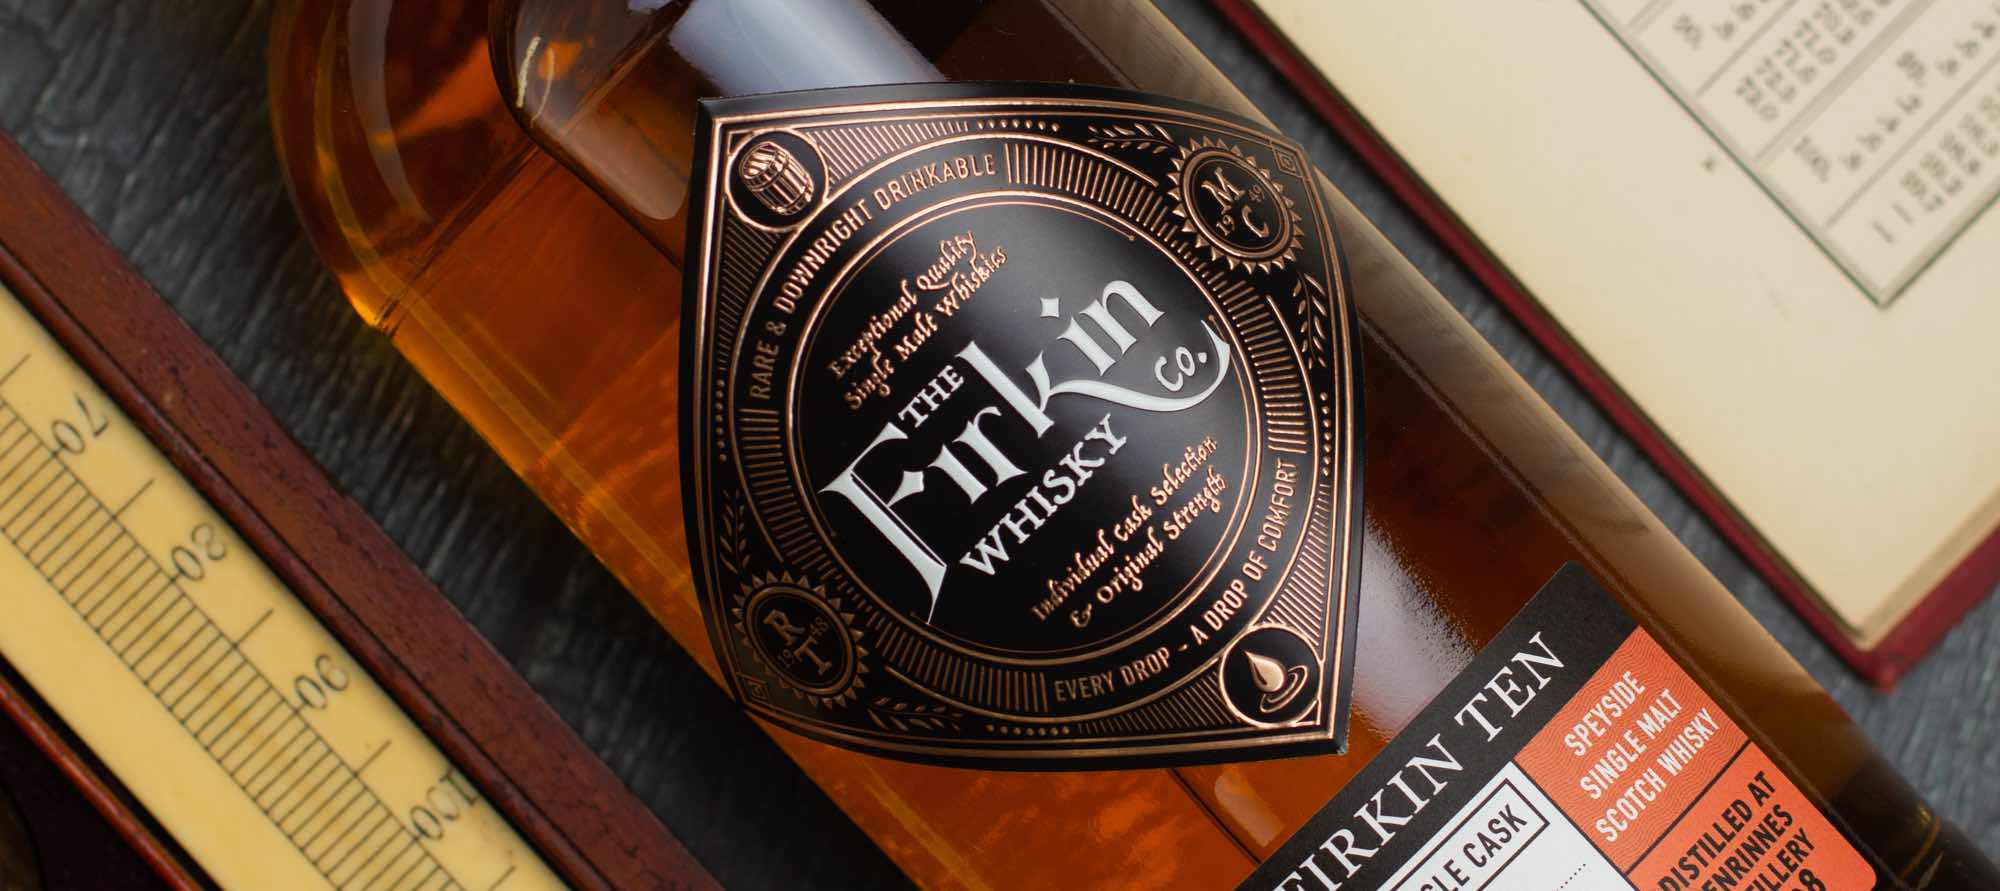 Incredible Indies: The Firkin Whisky Co Scotch Tasting Set